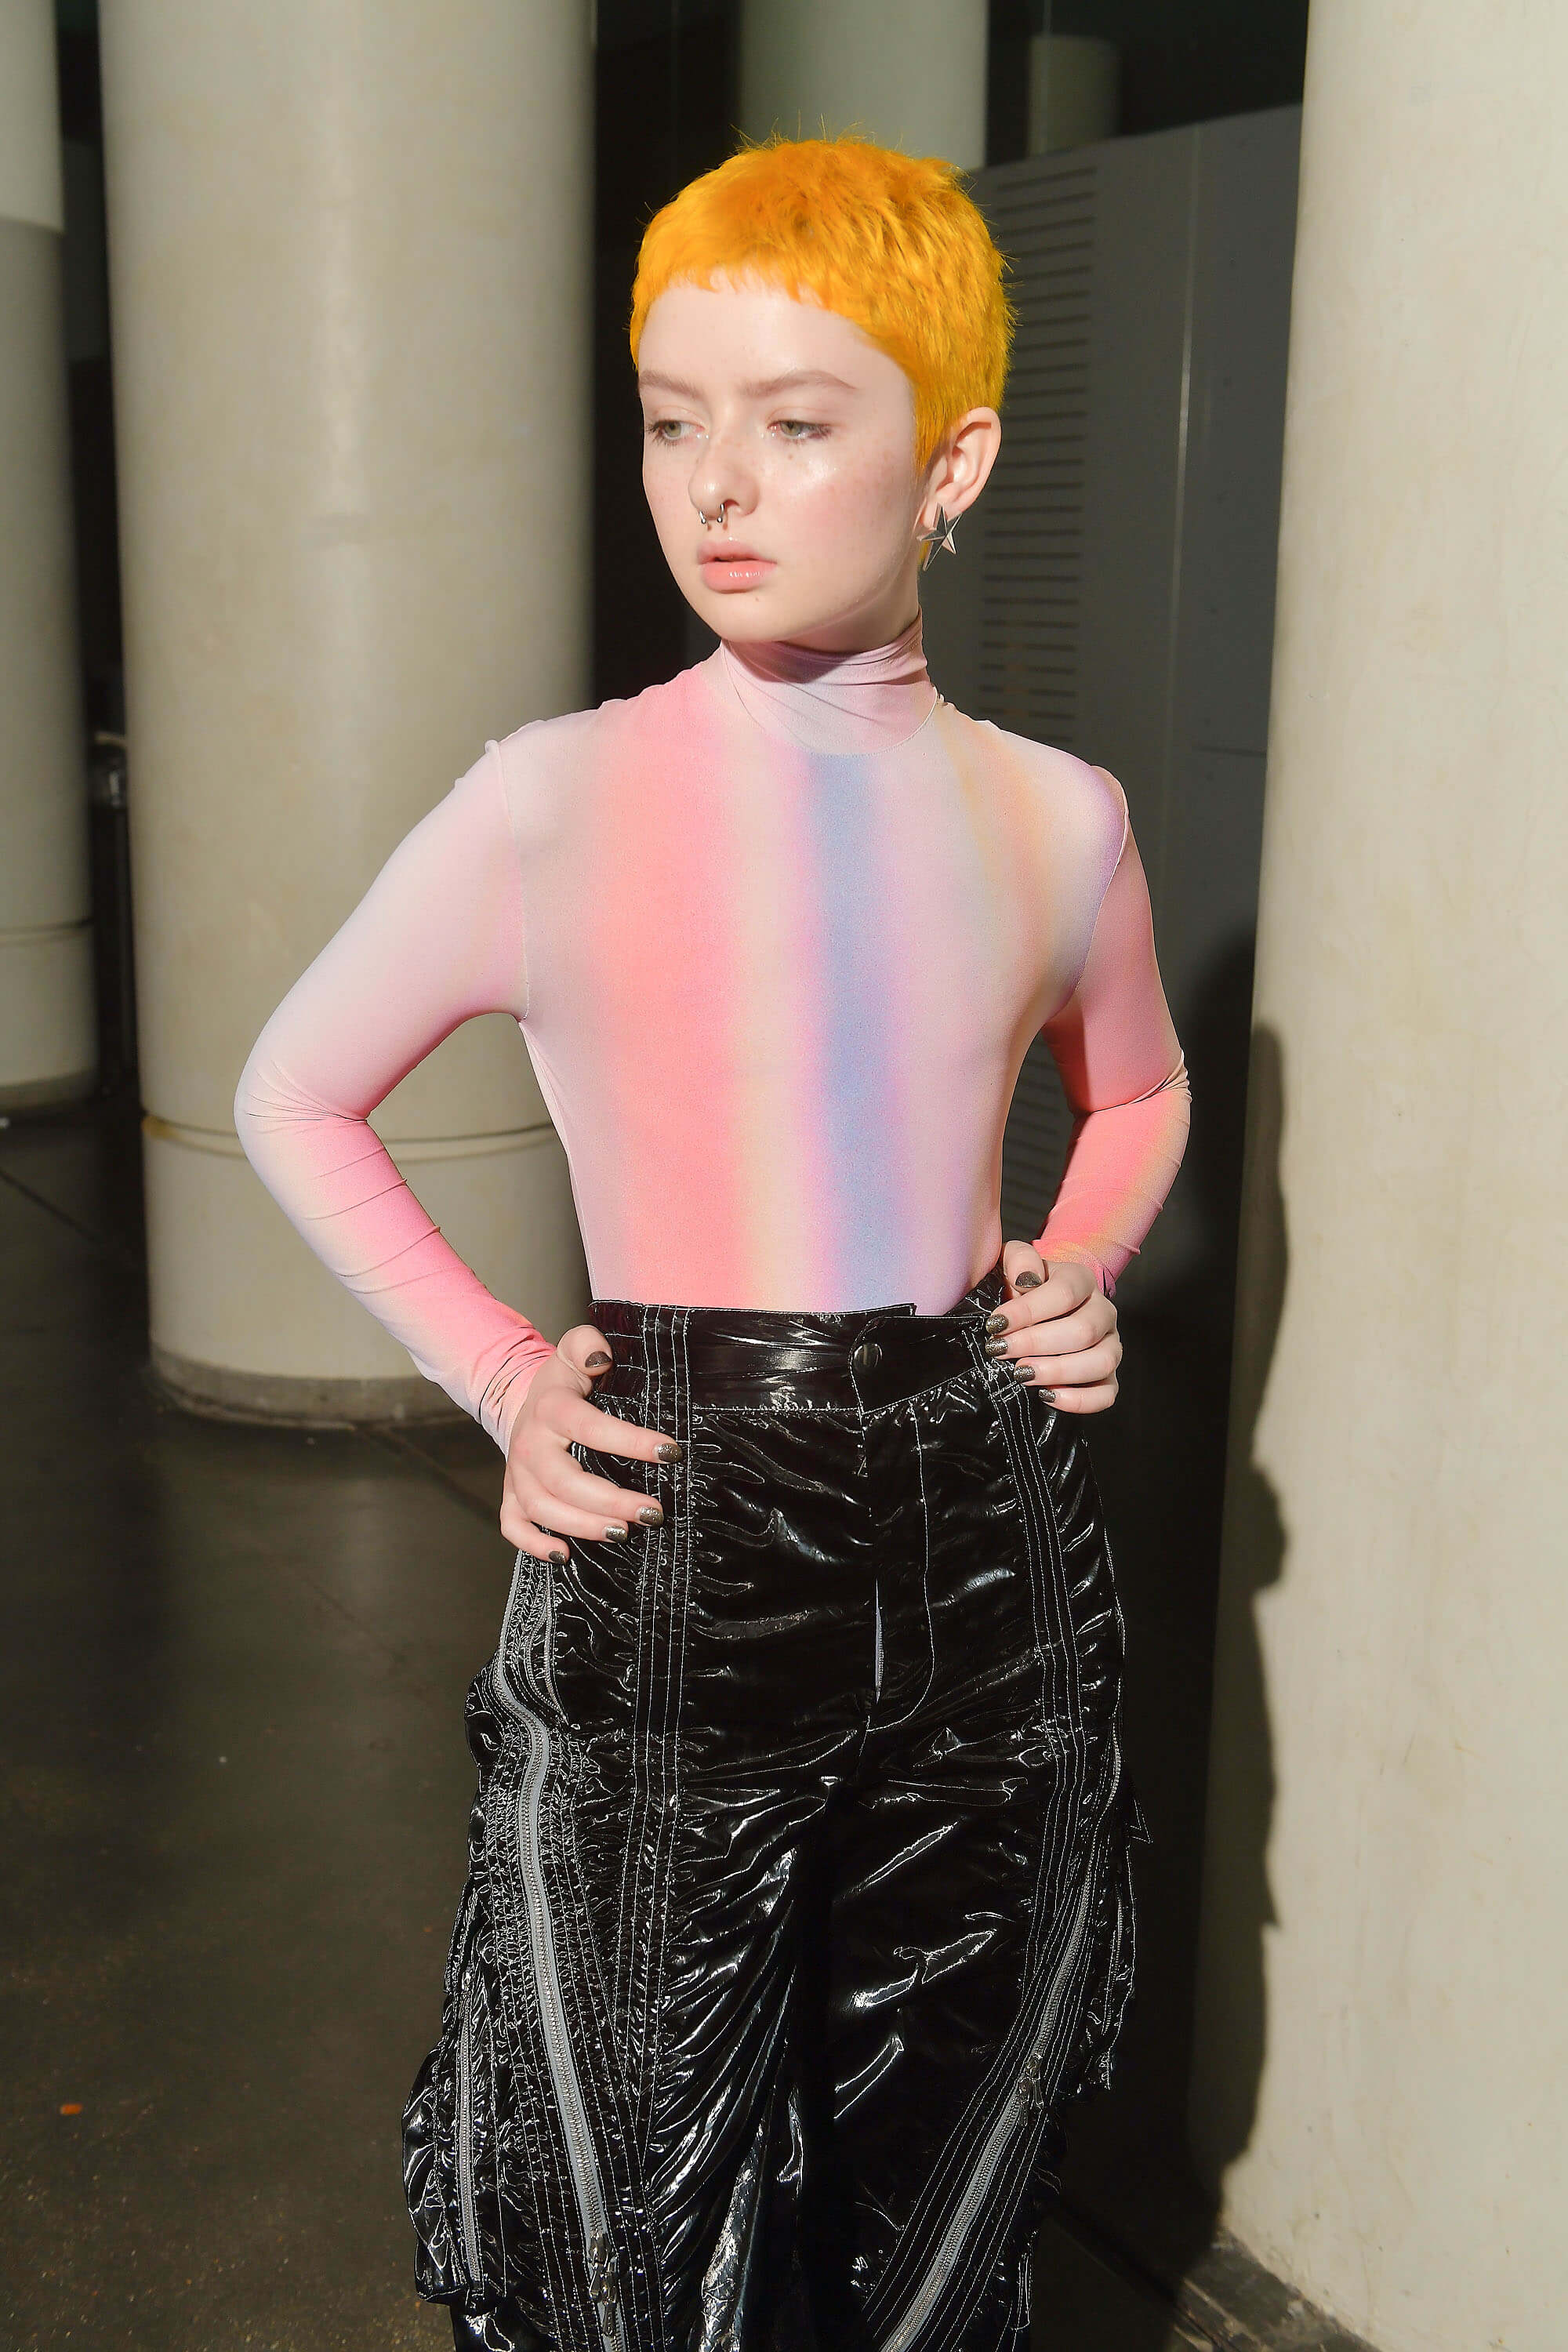 Model with short orange hair, rainbow top and black pants for Mugler